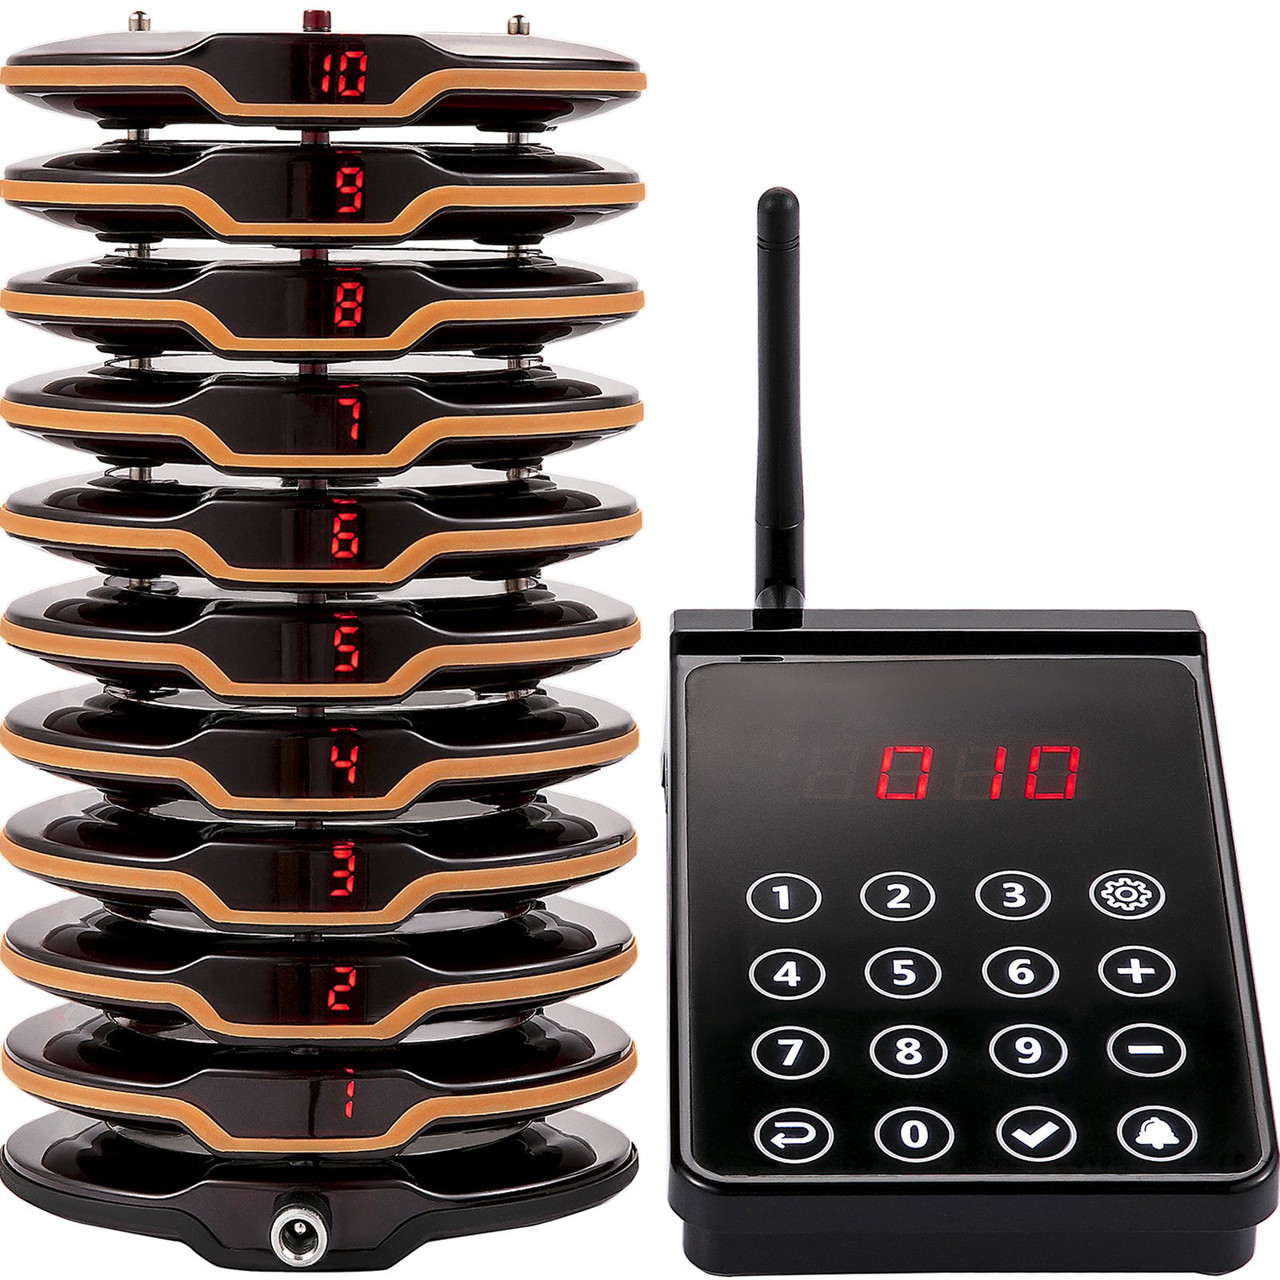 Restaurant Pager System 10 Coasters Max 98 Nursery Pager Wireless Paging Queuing Calling System 350-500m with Vibration, Flashing and Buzzer for Social Distance Food Truck Hotels Cafes